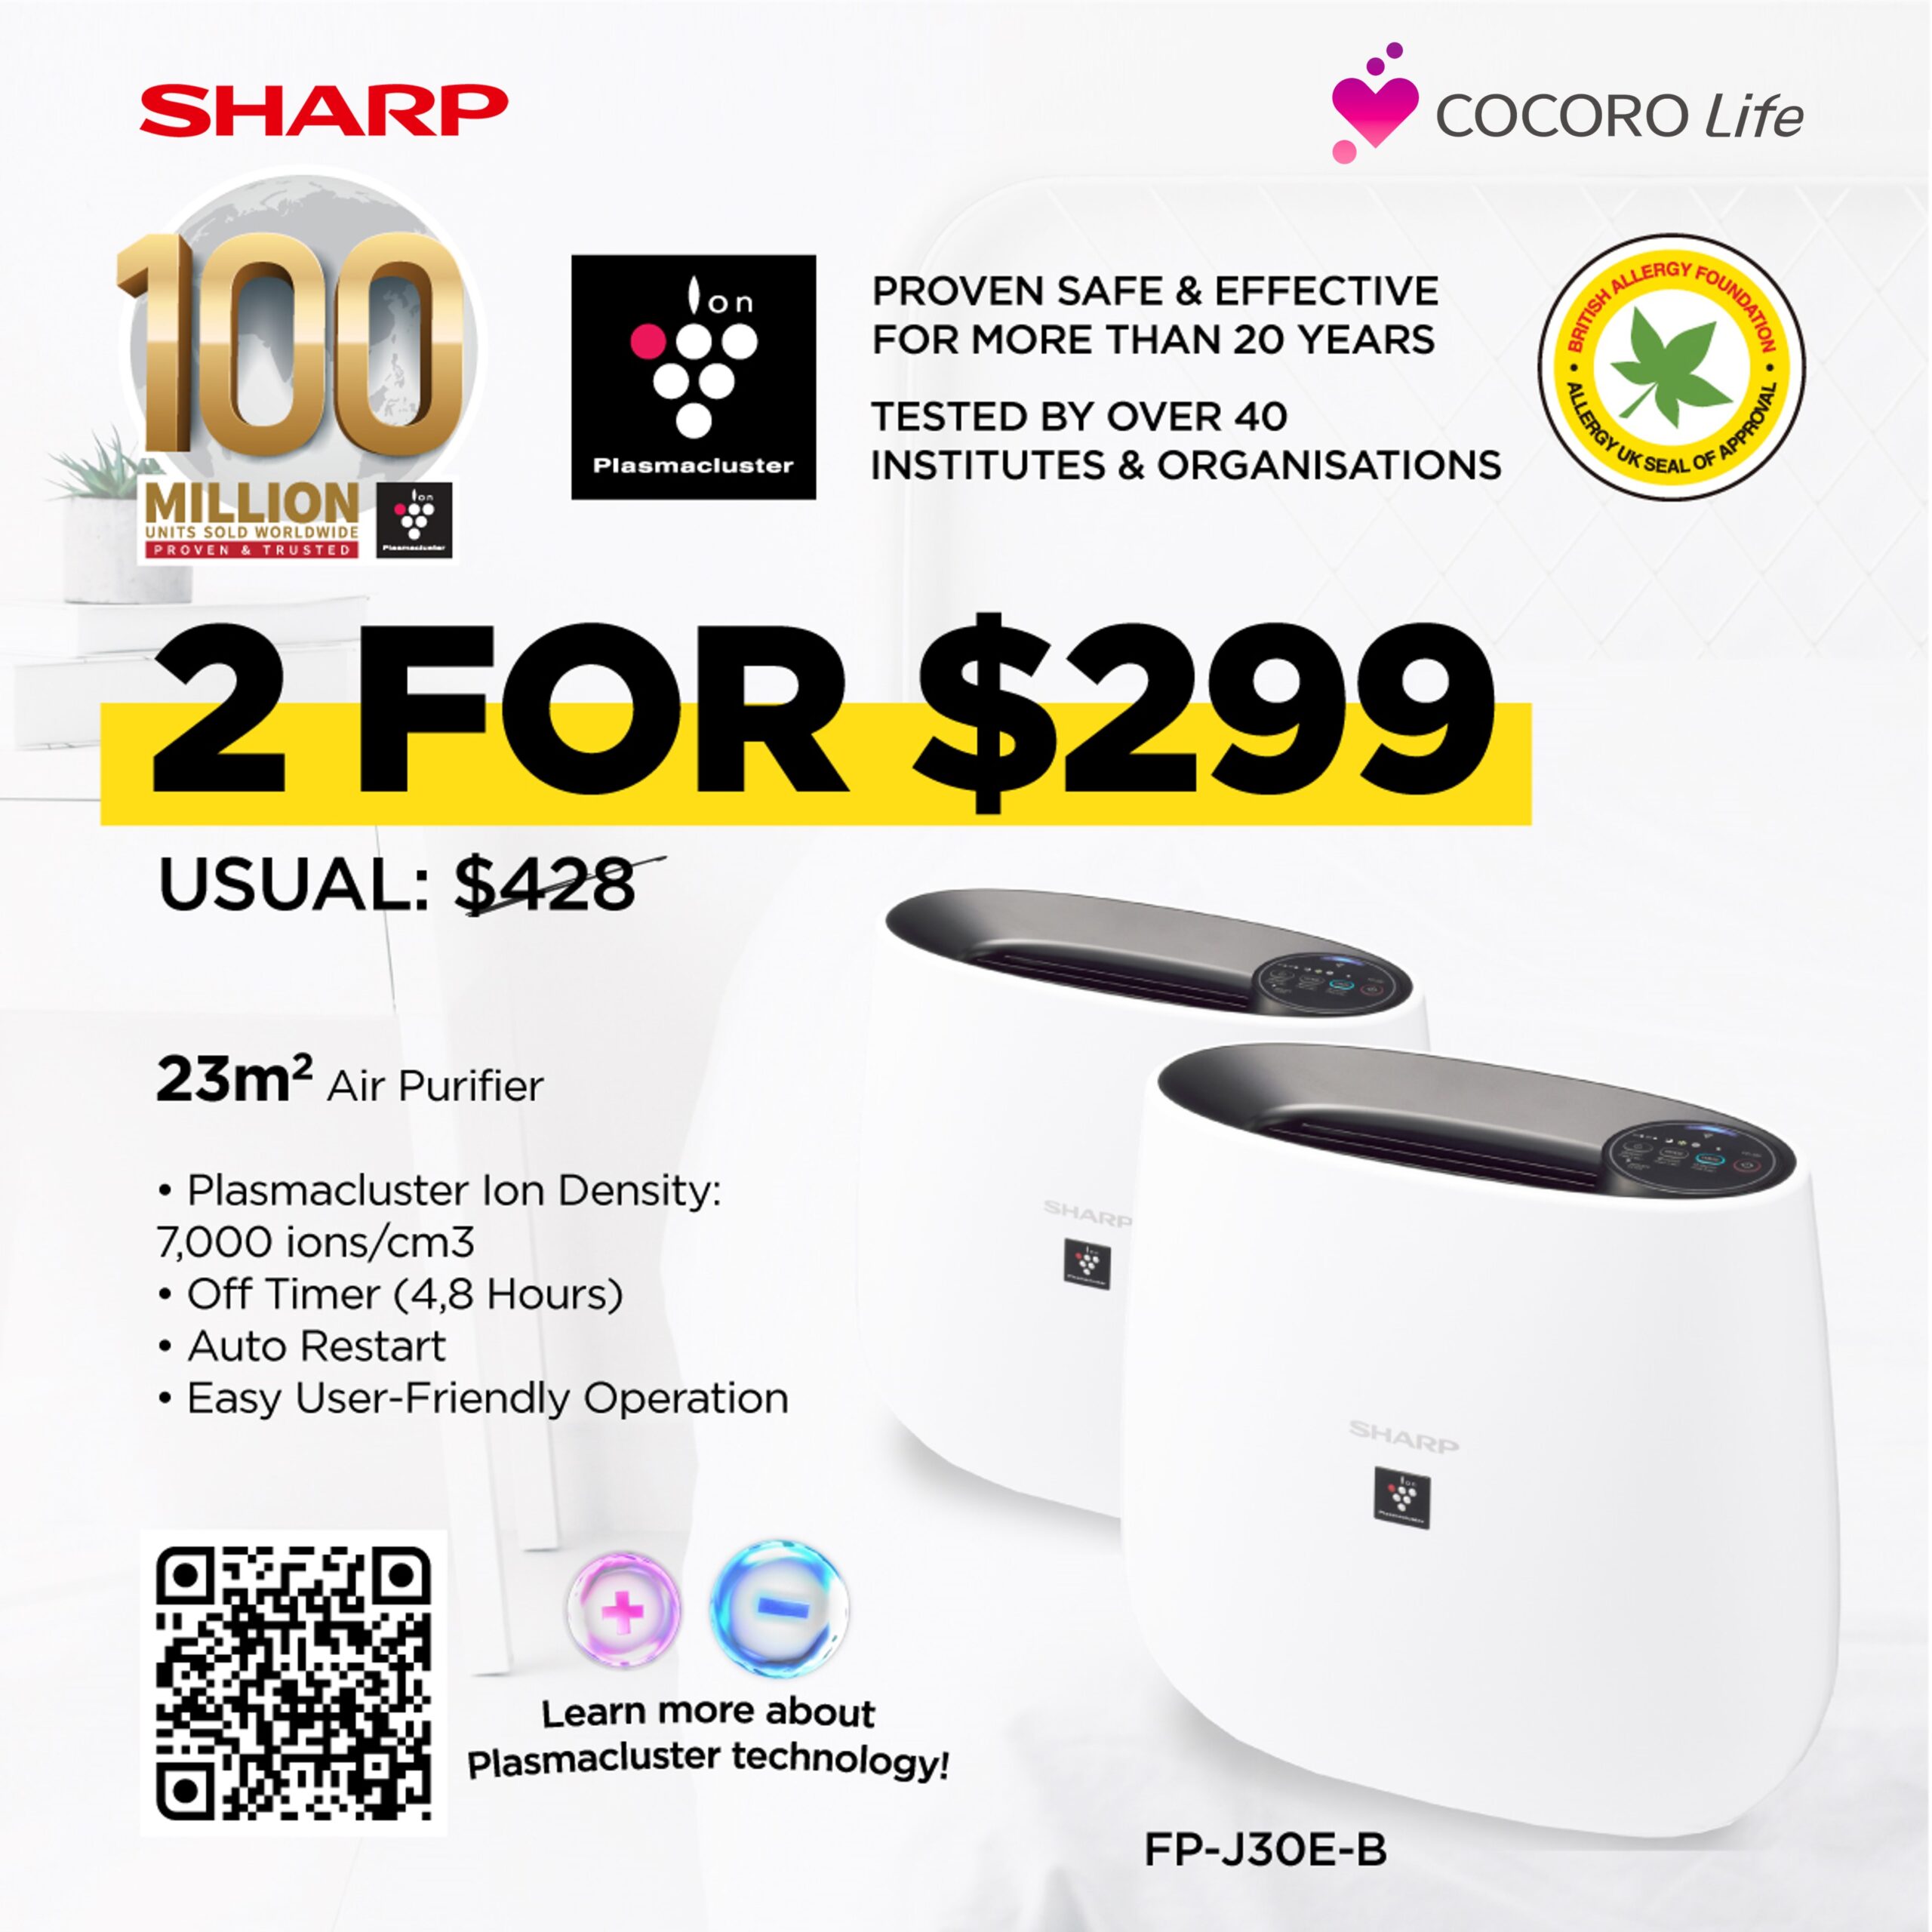 [SPECIAL OFFER] <b>2 for $299</b> – SHARP Plasmacluster Air Purifier 23m<sup>2</sup> FP-J30E-B